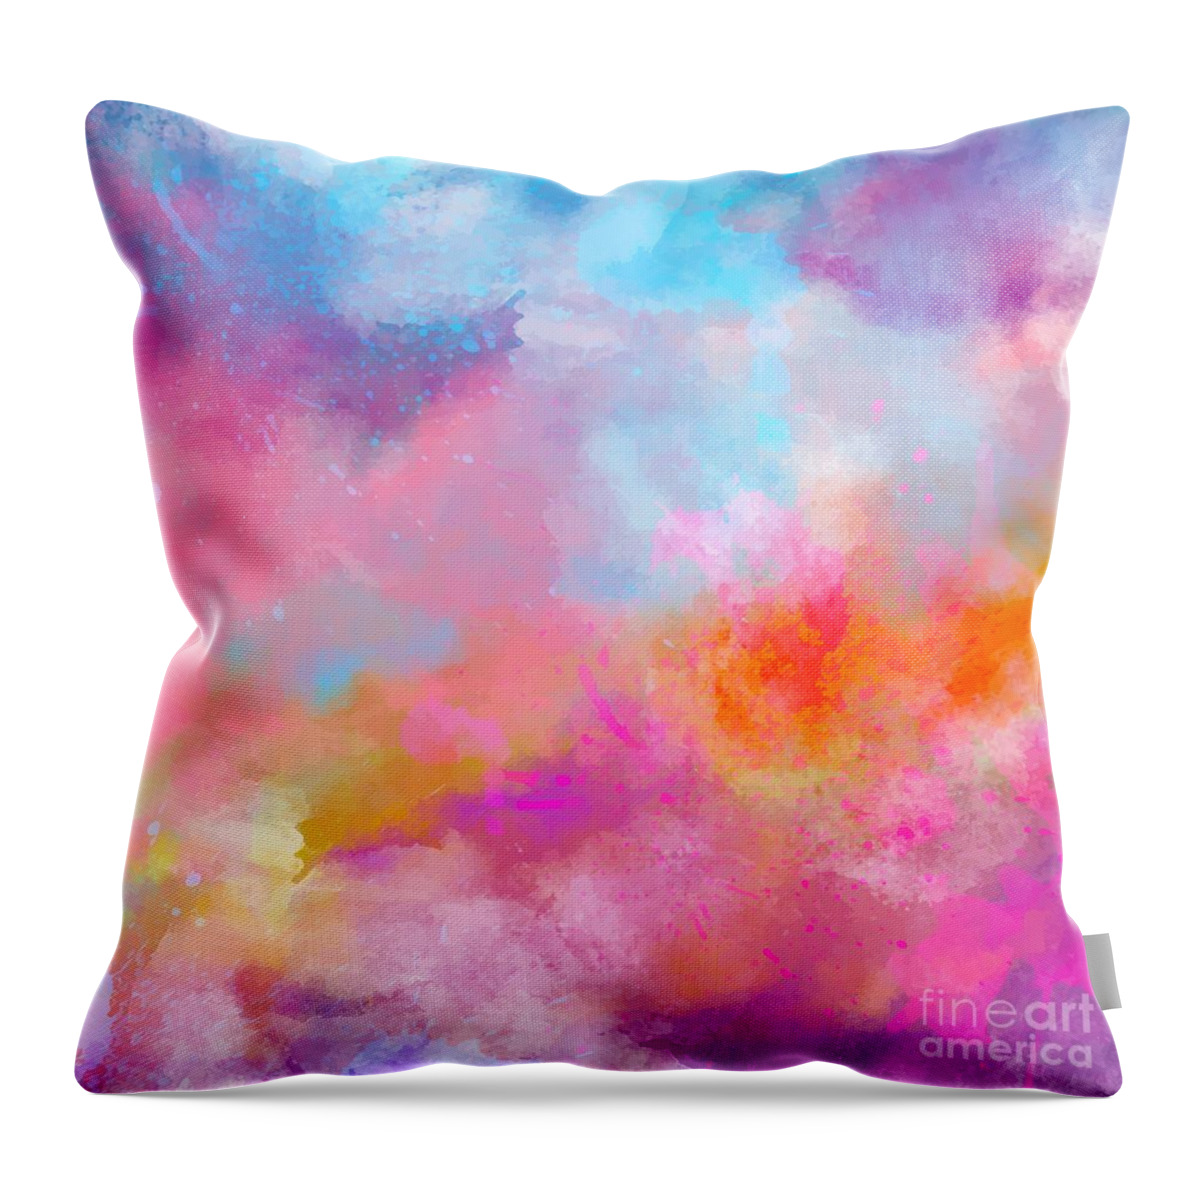 Watercolor Throw Pillow featuring the digital art Daimaru - Artistic Abstract Blue Purple Bright Watercolor Painting Digital Art by Sambel Pedes